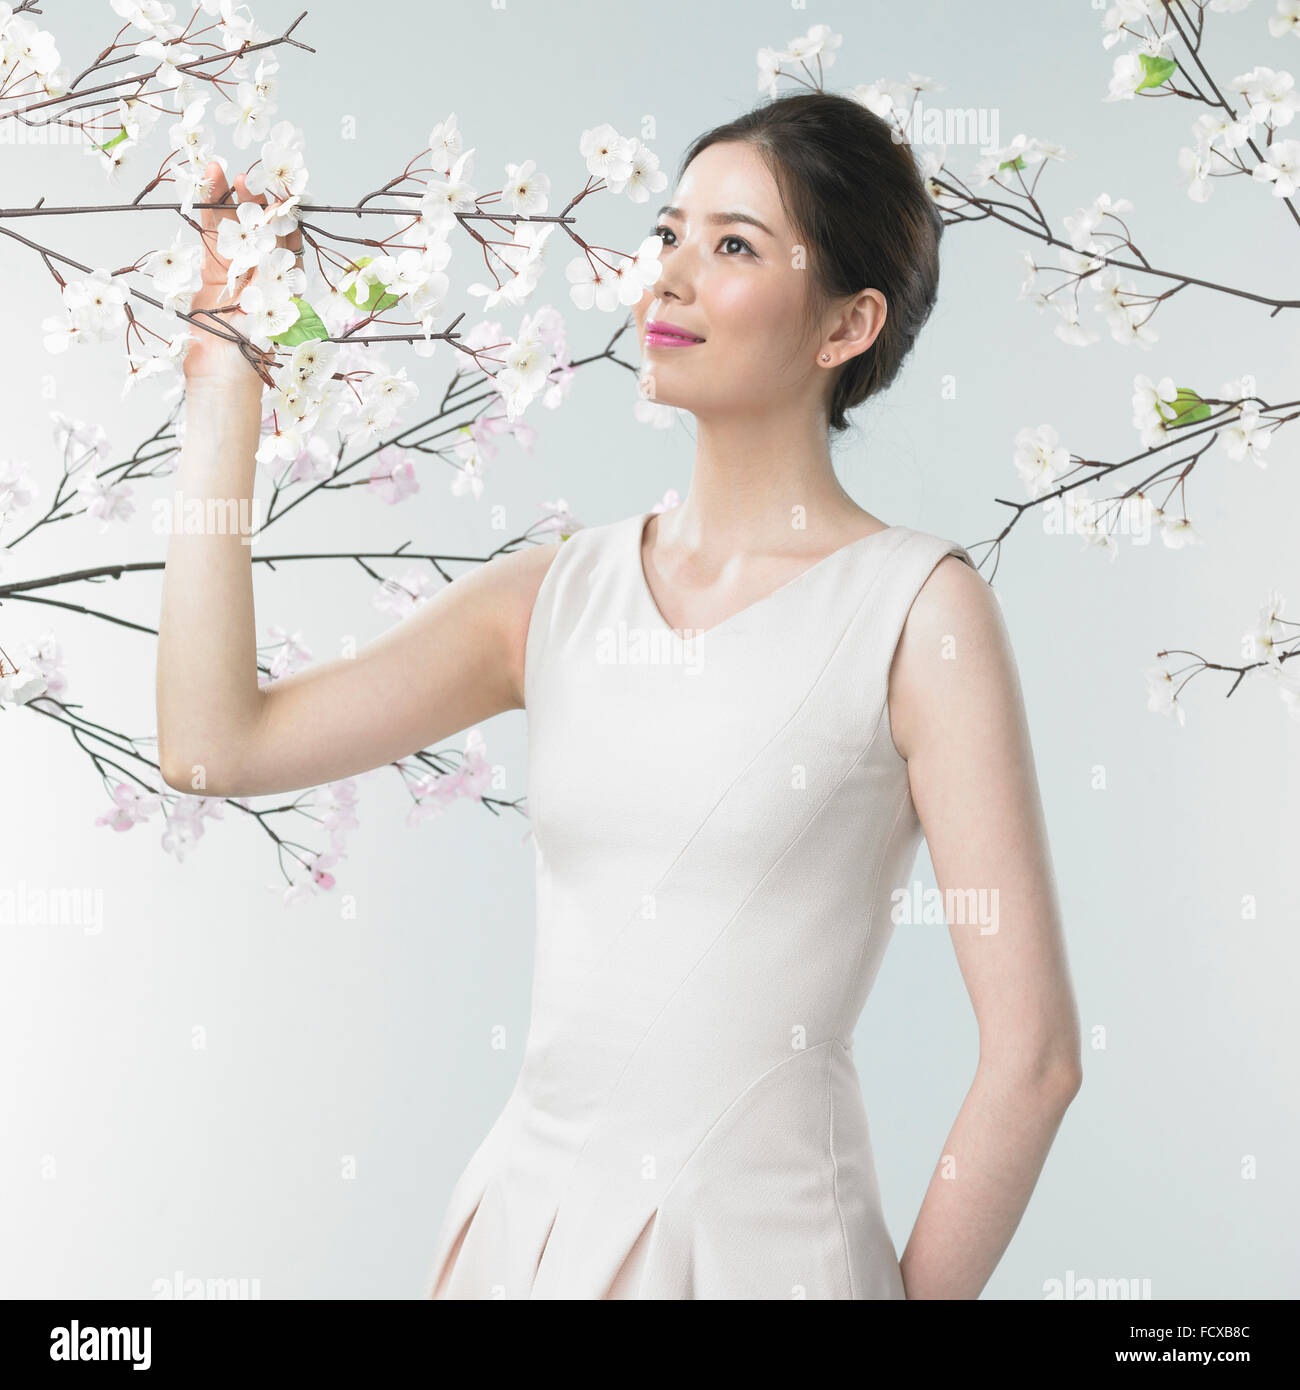 Woman looking up and holding a branch of cherry blossom with the background of cherry blossom branches Stock Photo